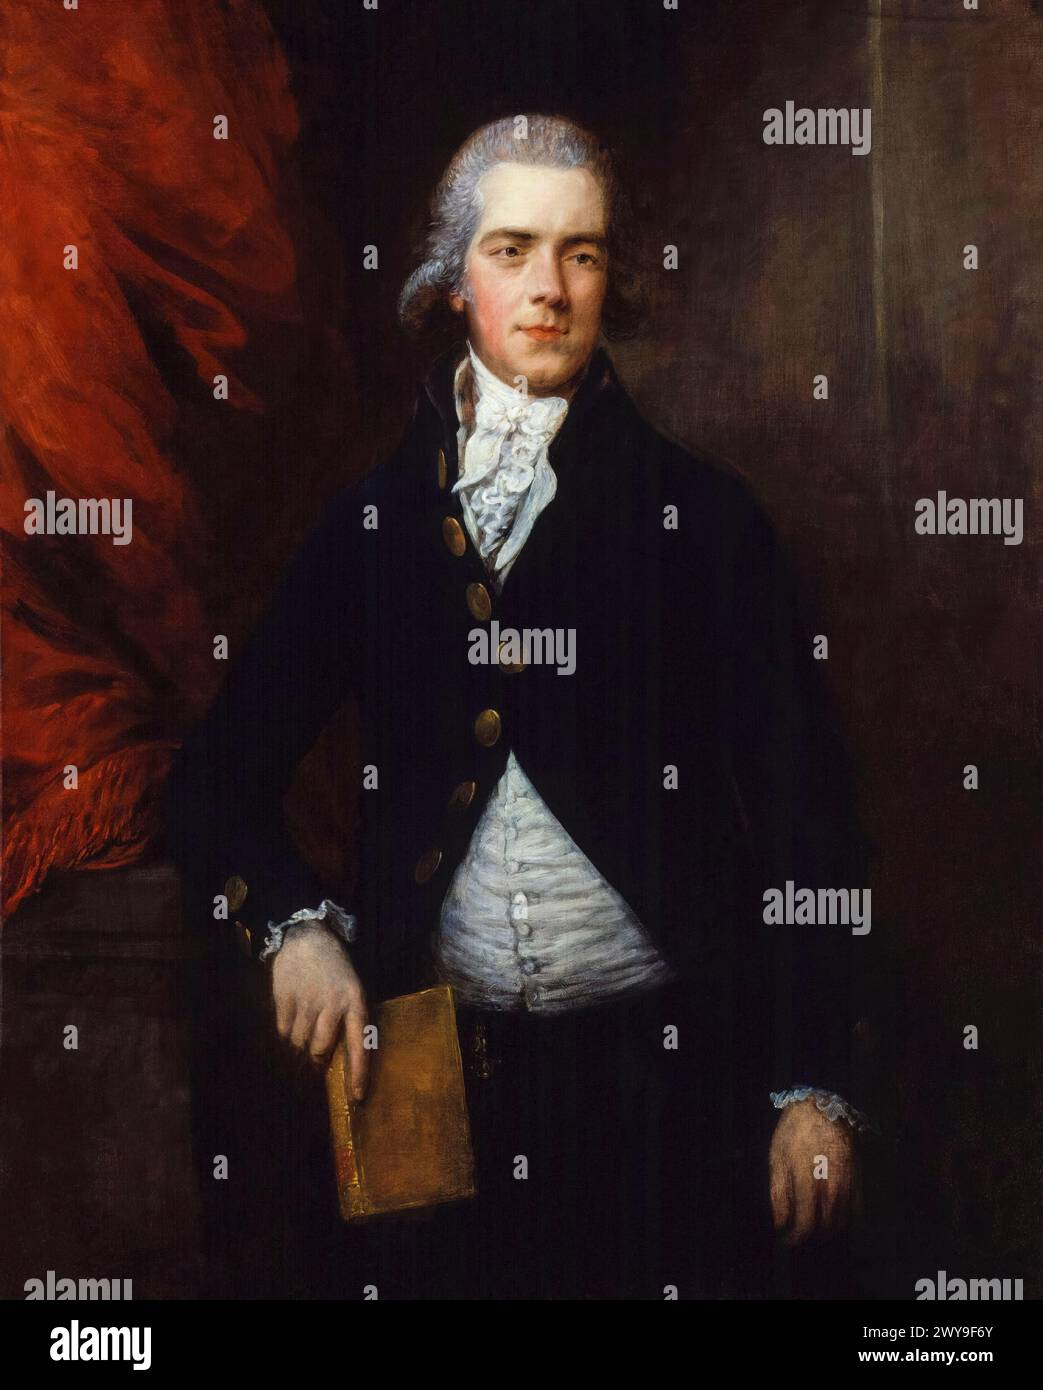 William Grenville, 1st Baron Grenville (1759-1834), Tory politician and Prime Minister of the United Kingdom, 1806-1807, portrait painting in oil on canvas by Gainsborough Dupont, circa 1790 Stock Photo